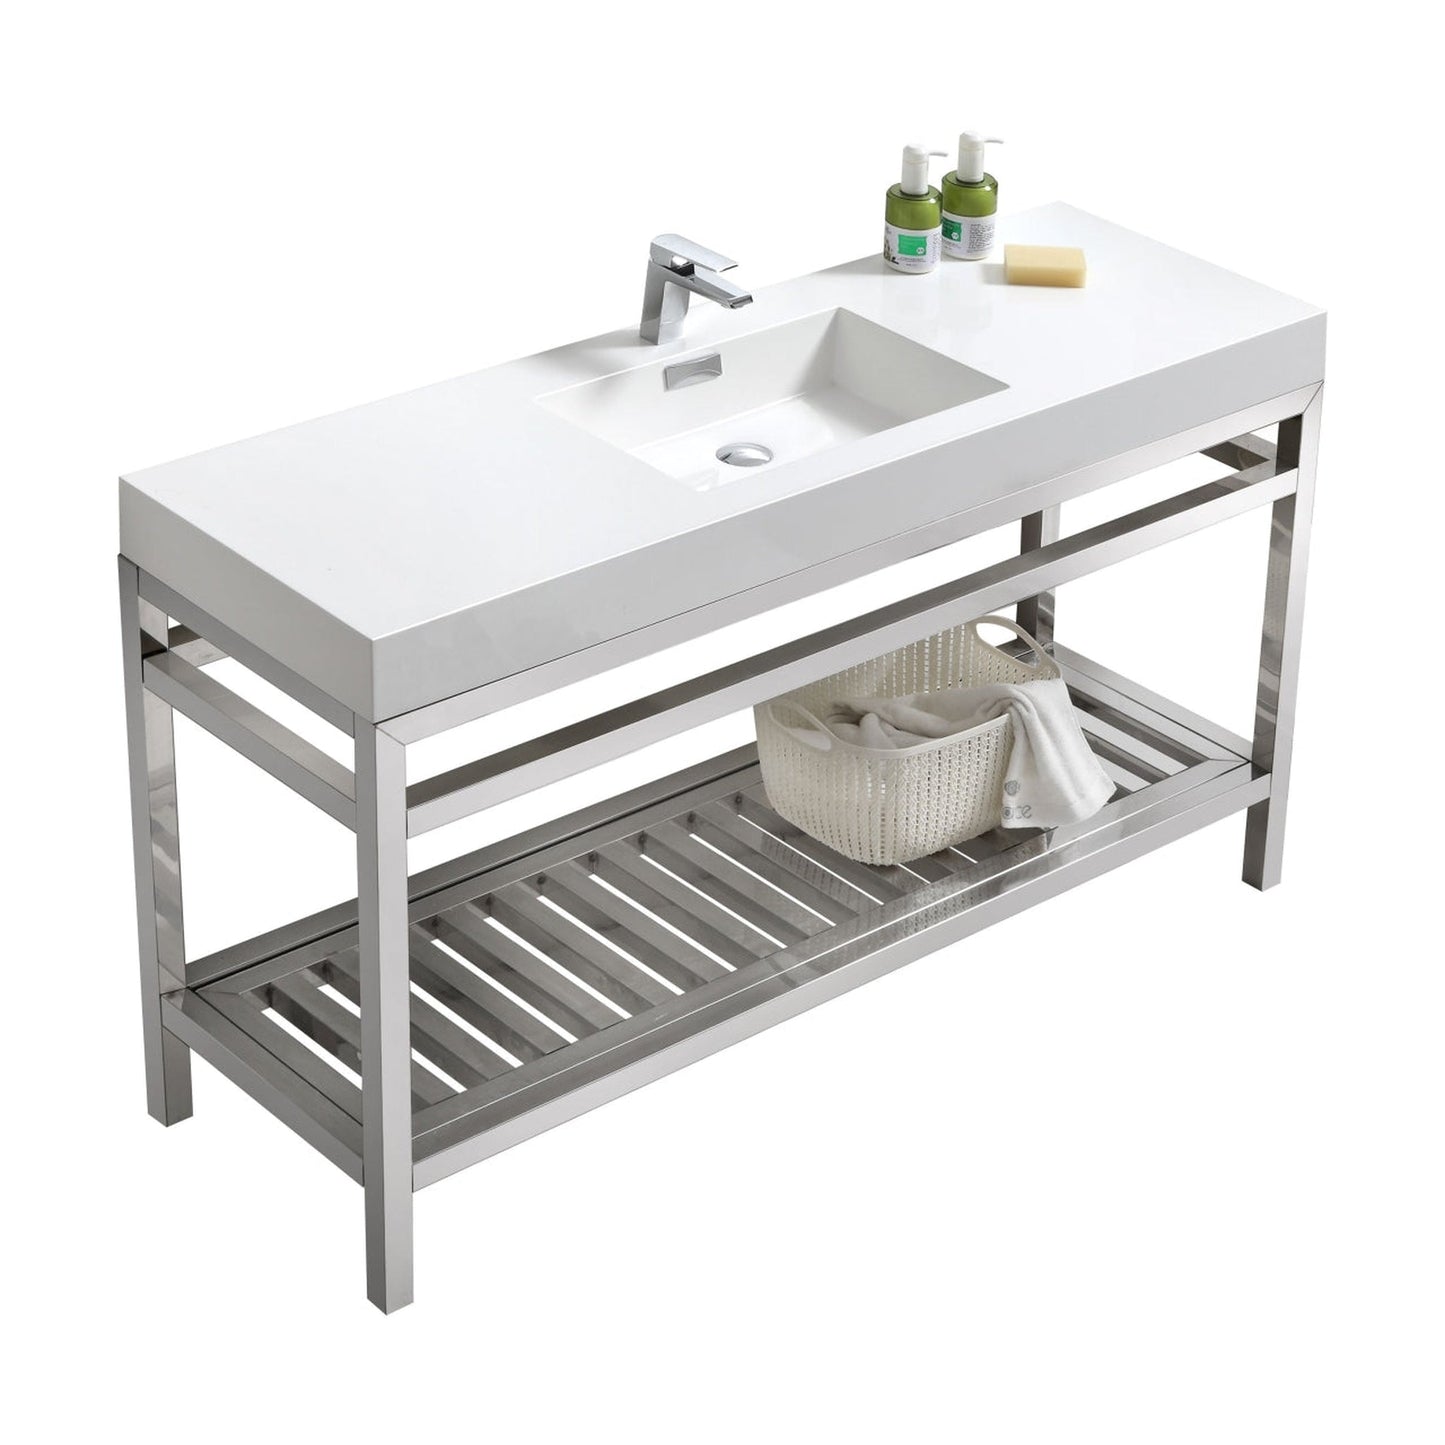 KubeBath Cisco 60" Stainless Steel Chrome Console Freestanding Modern Bathroom Vanity With Single Integrated Acrylic Sink With Overflow and 60" White Framed Mirror